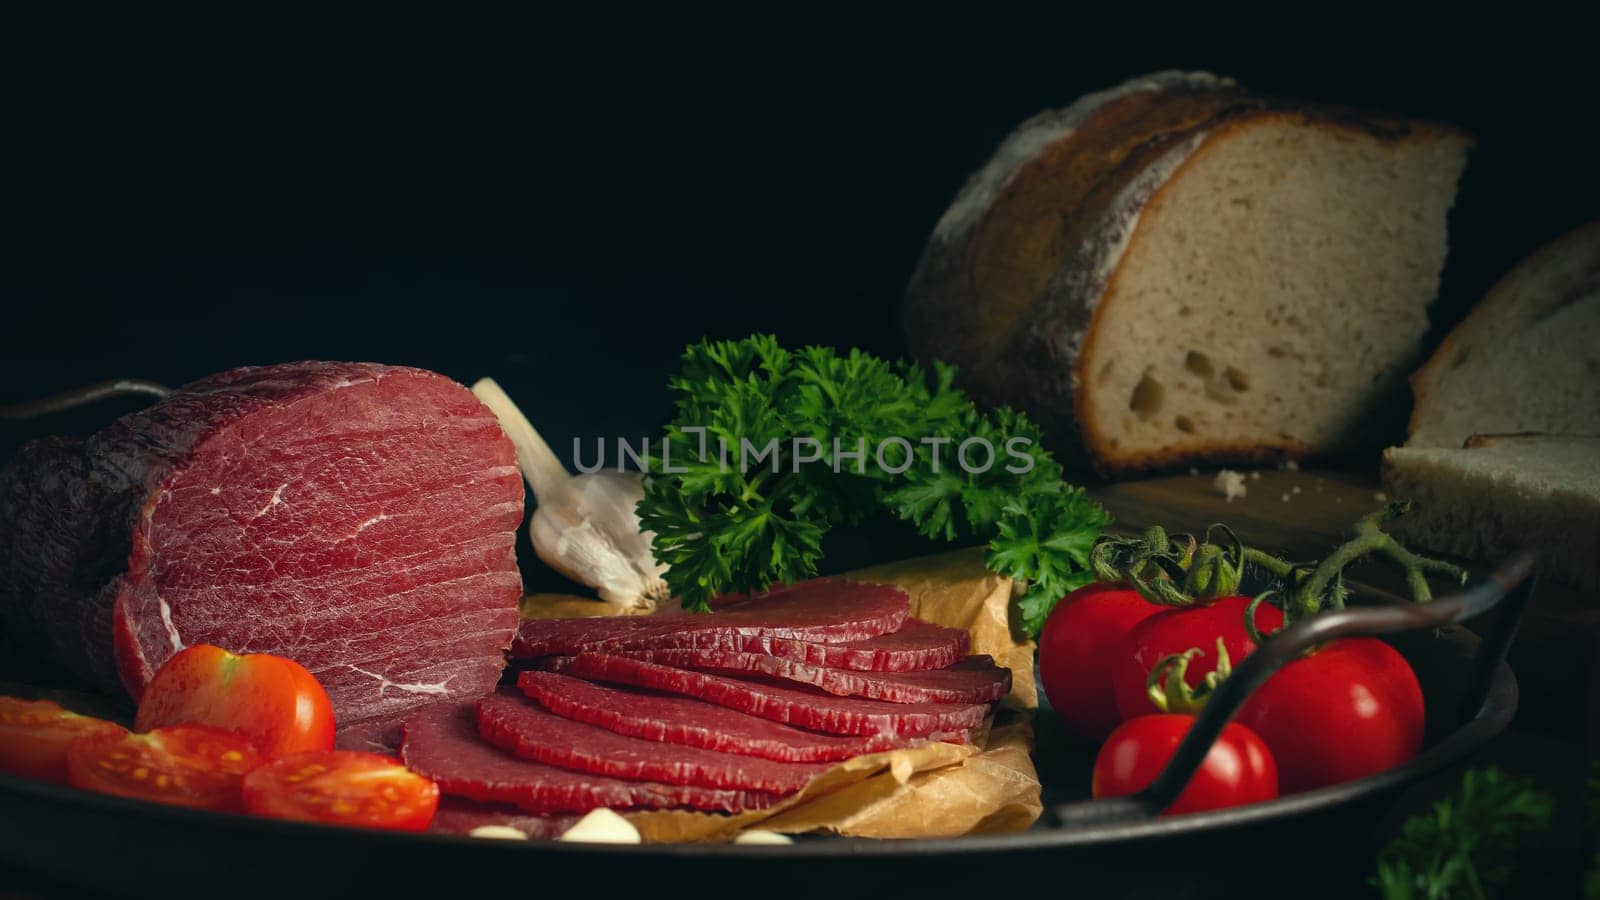 Whole and sliced bresaola on a metal round tray with tomatoes, garlic and bread by galsand